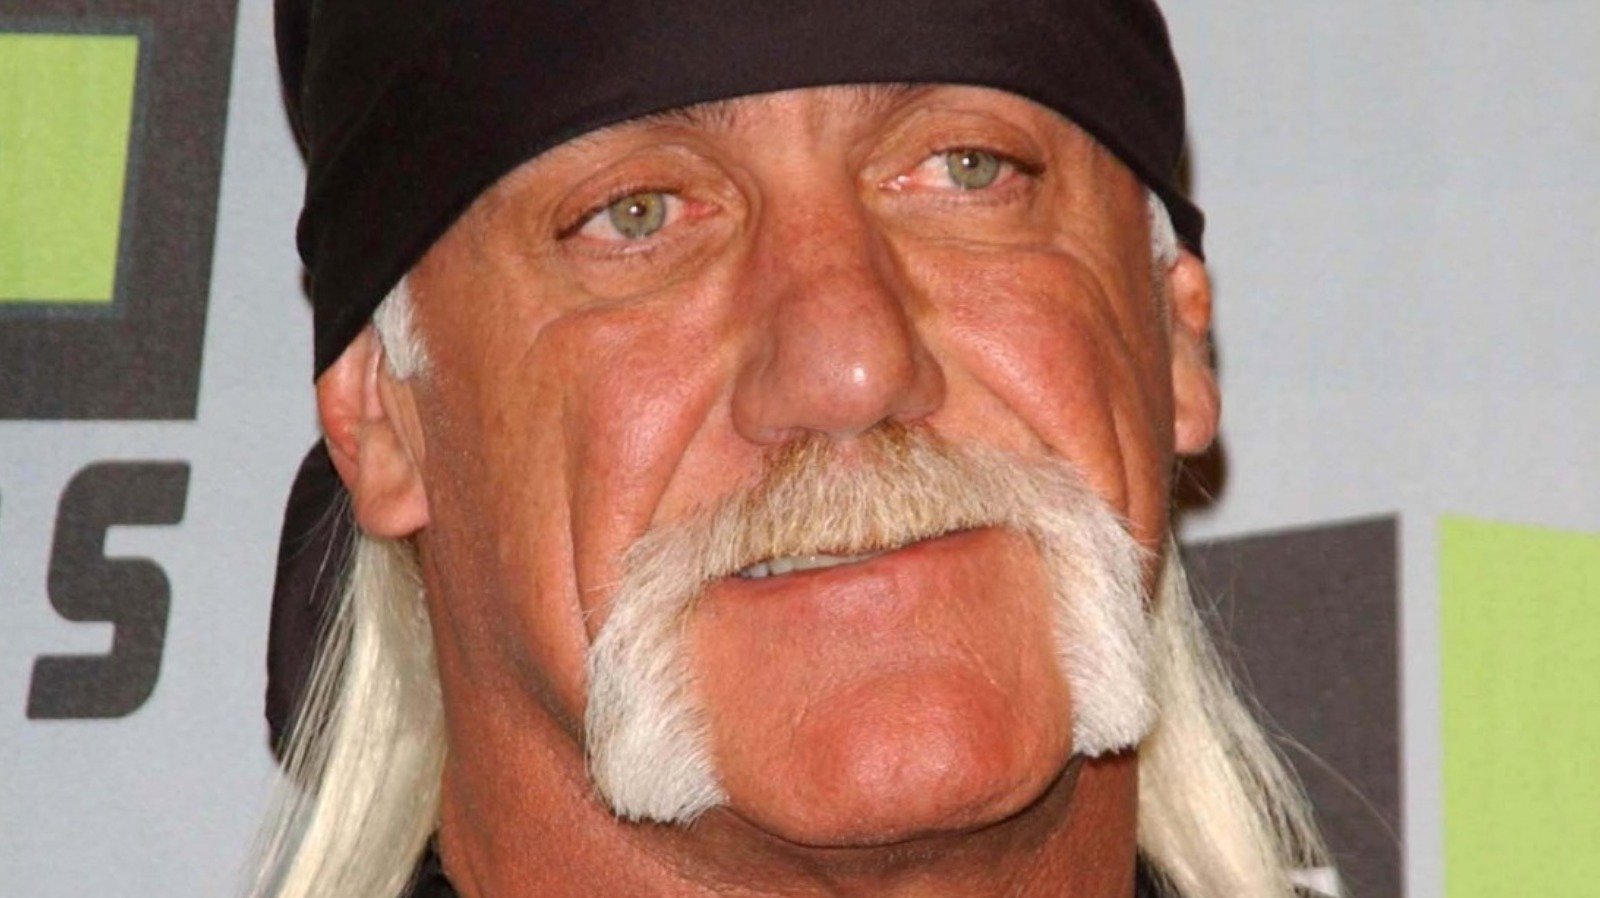 Hulk Hogan Once Had A Foreman Grill Competitor That Was A Massive Failure   